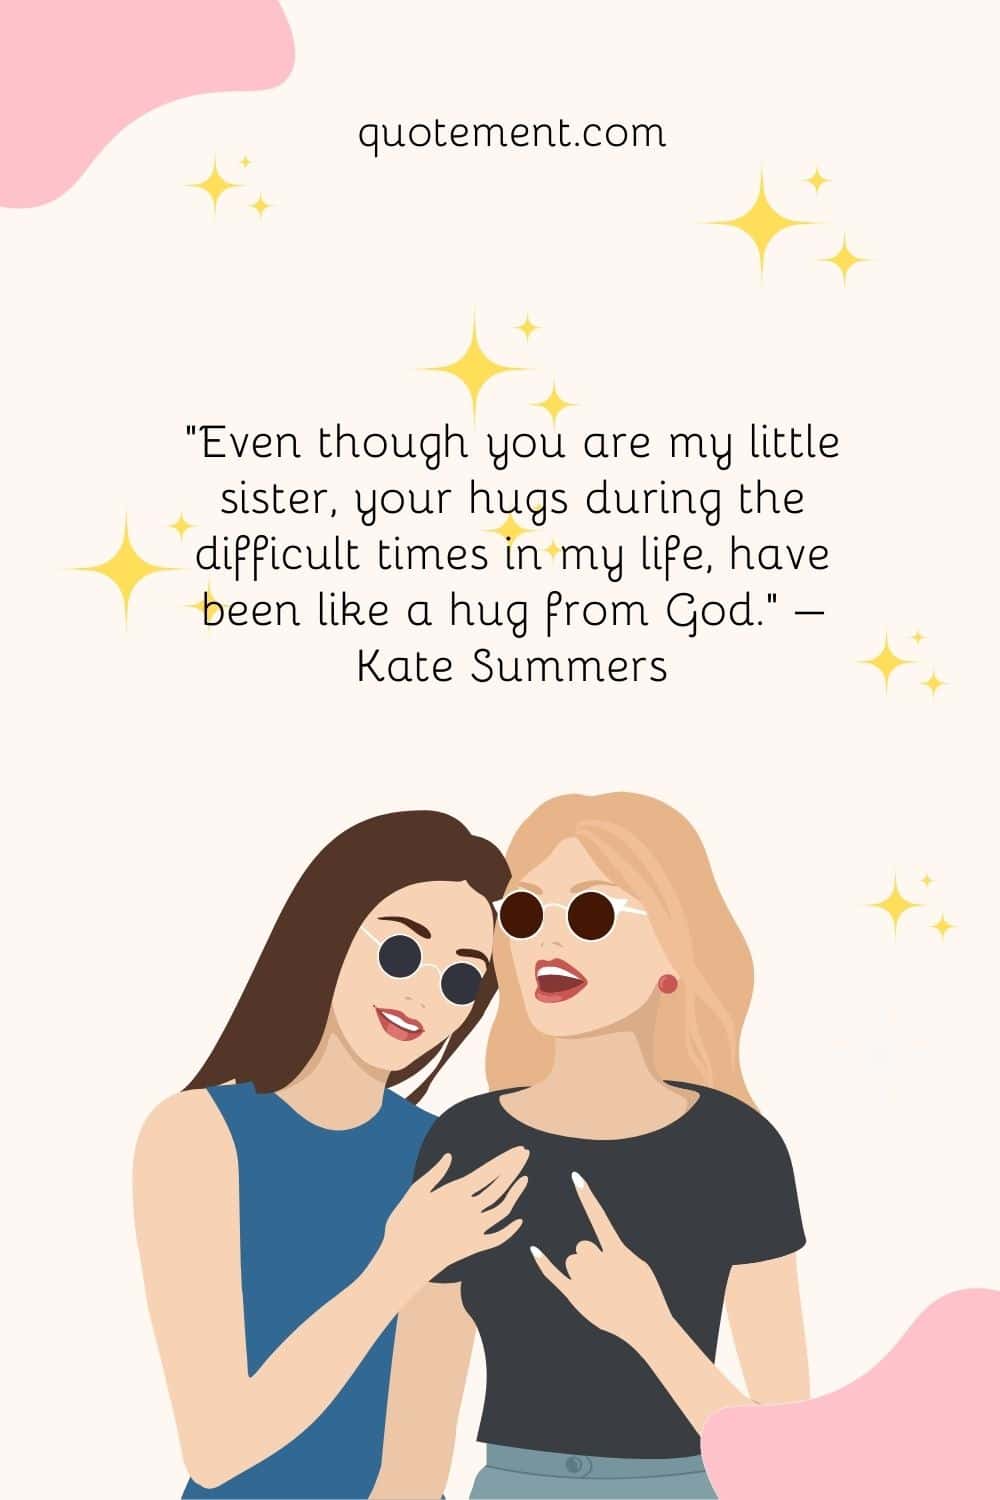 “Even though you are my little sister, your hugs during the difficult times in my life, have been like a hug from God.” – Kate Summers